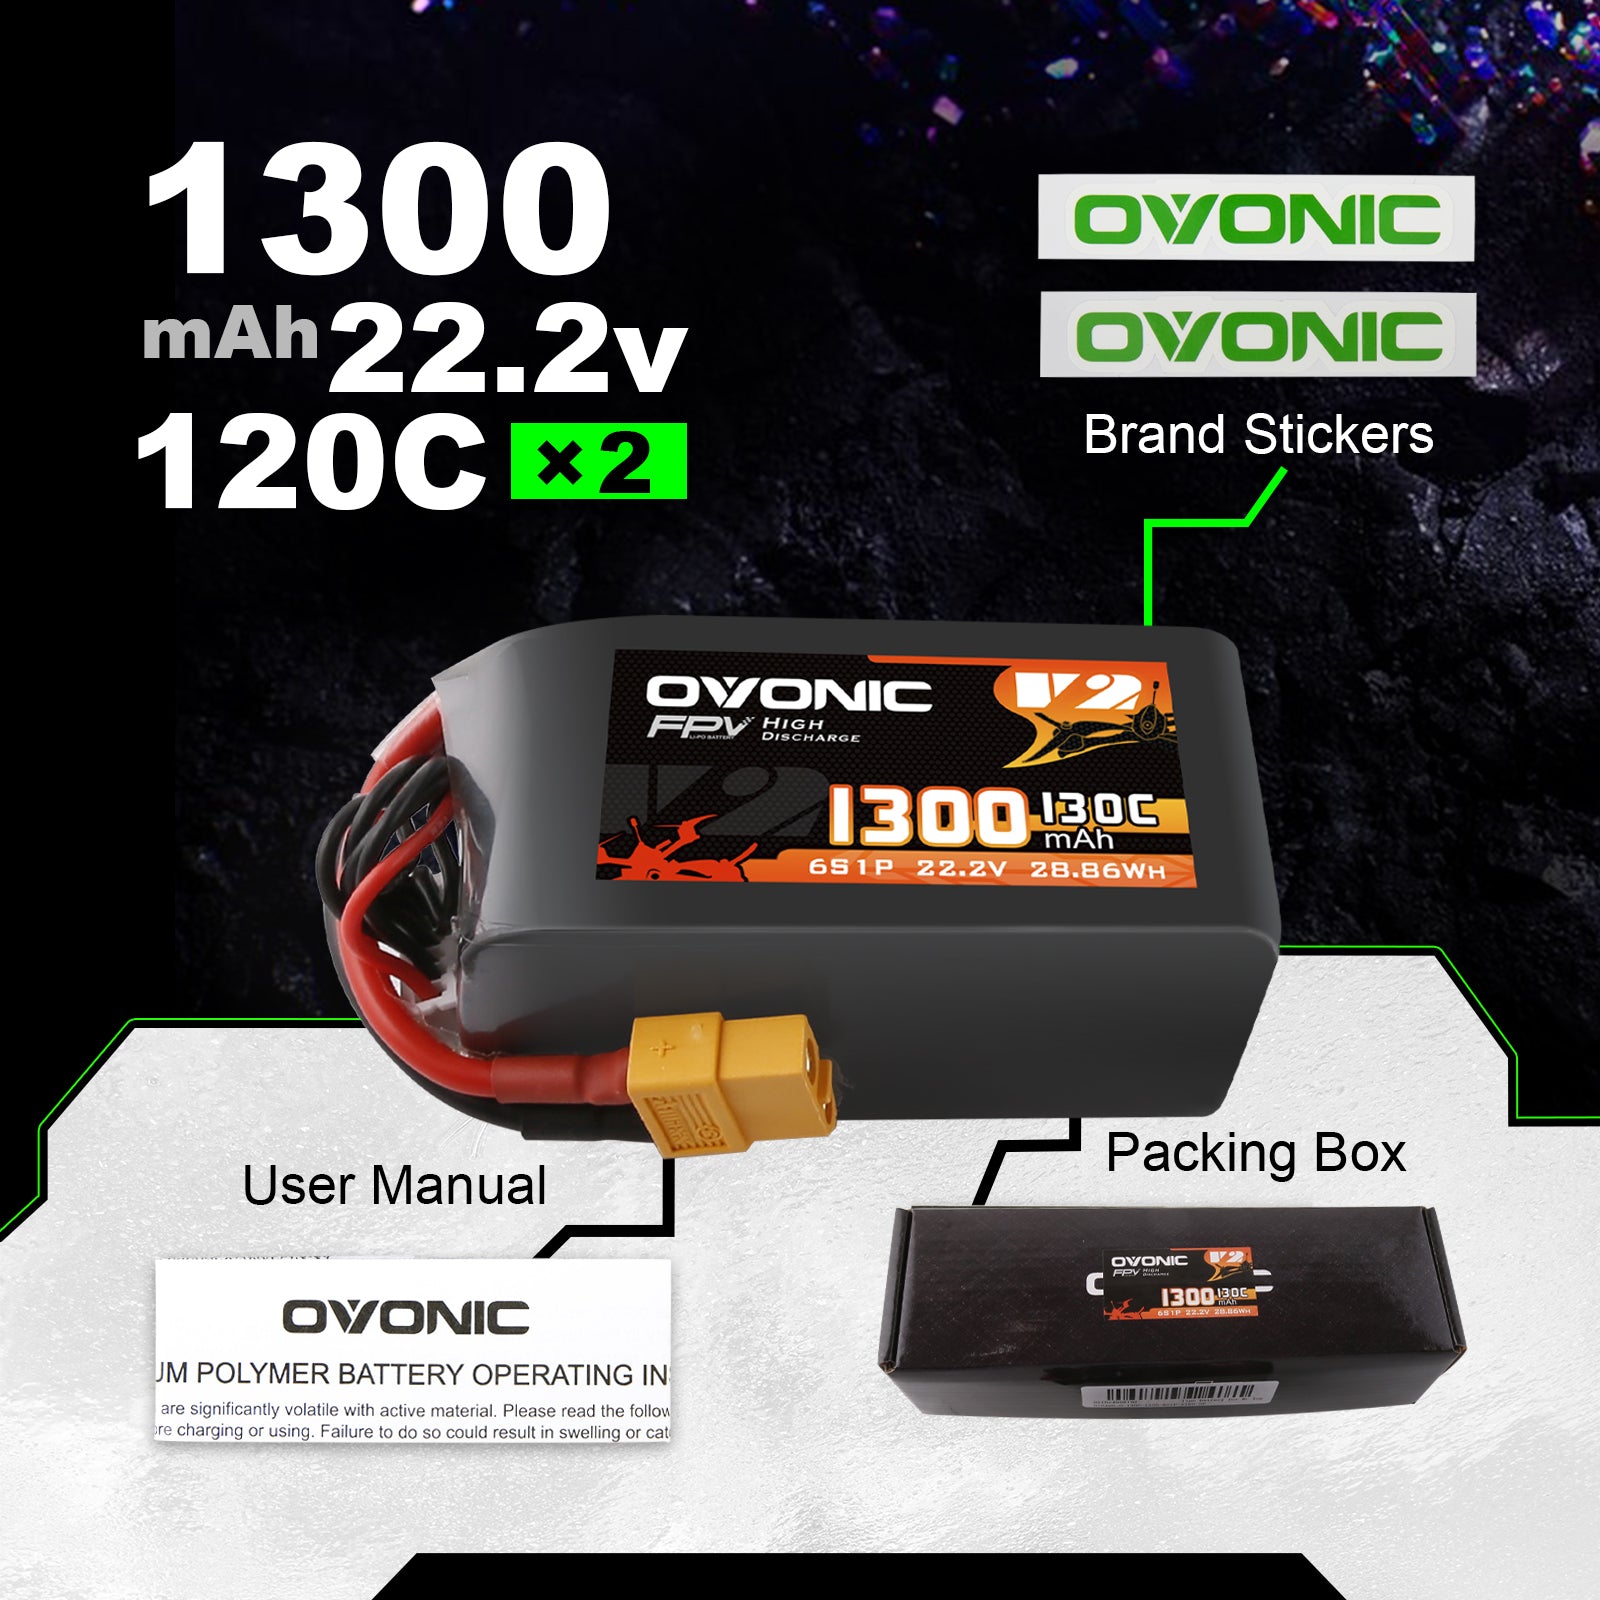 2x Ovonic 130C 6S 1300mah Lipo Battery 22.2V Pack with XT60 Plug for FPV Racing FPV Ampow